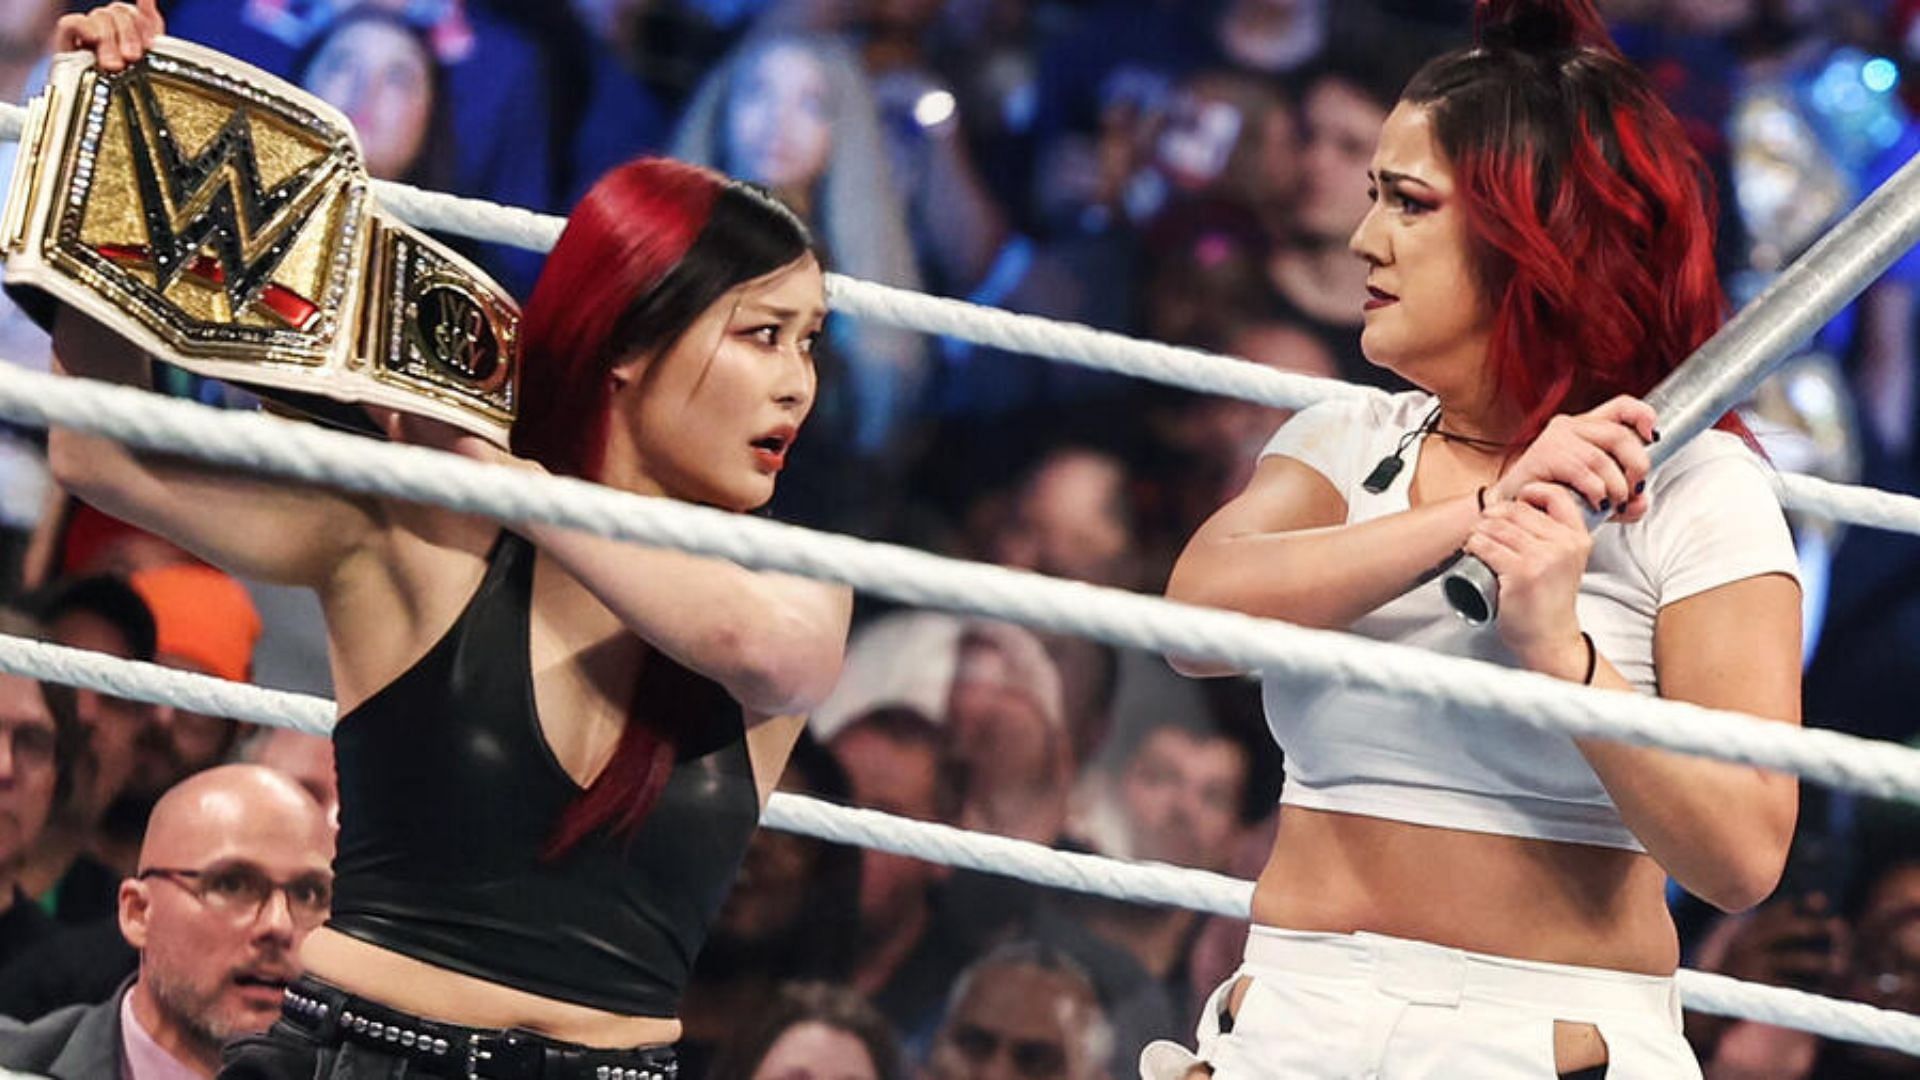 IYO SKY and Bayley will collide at WrestleMania 40